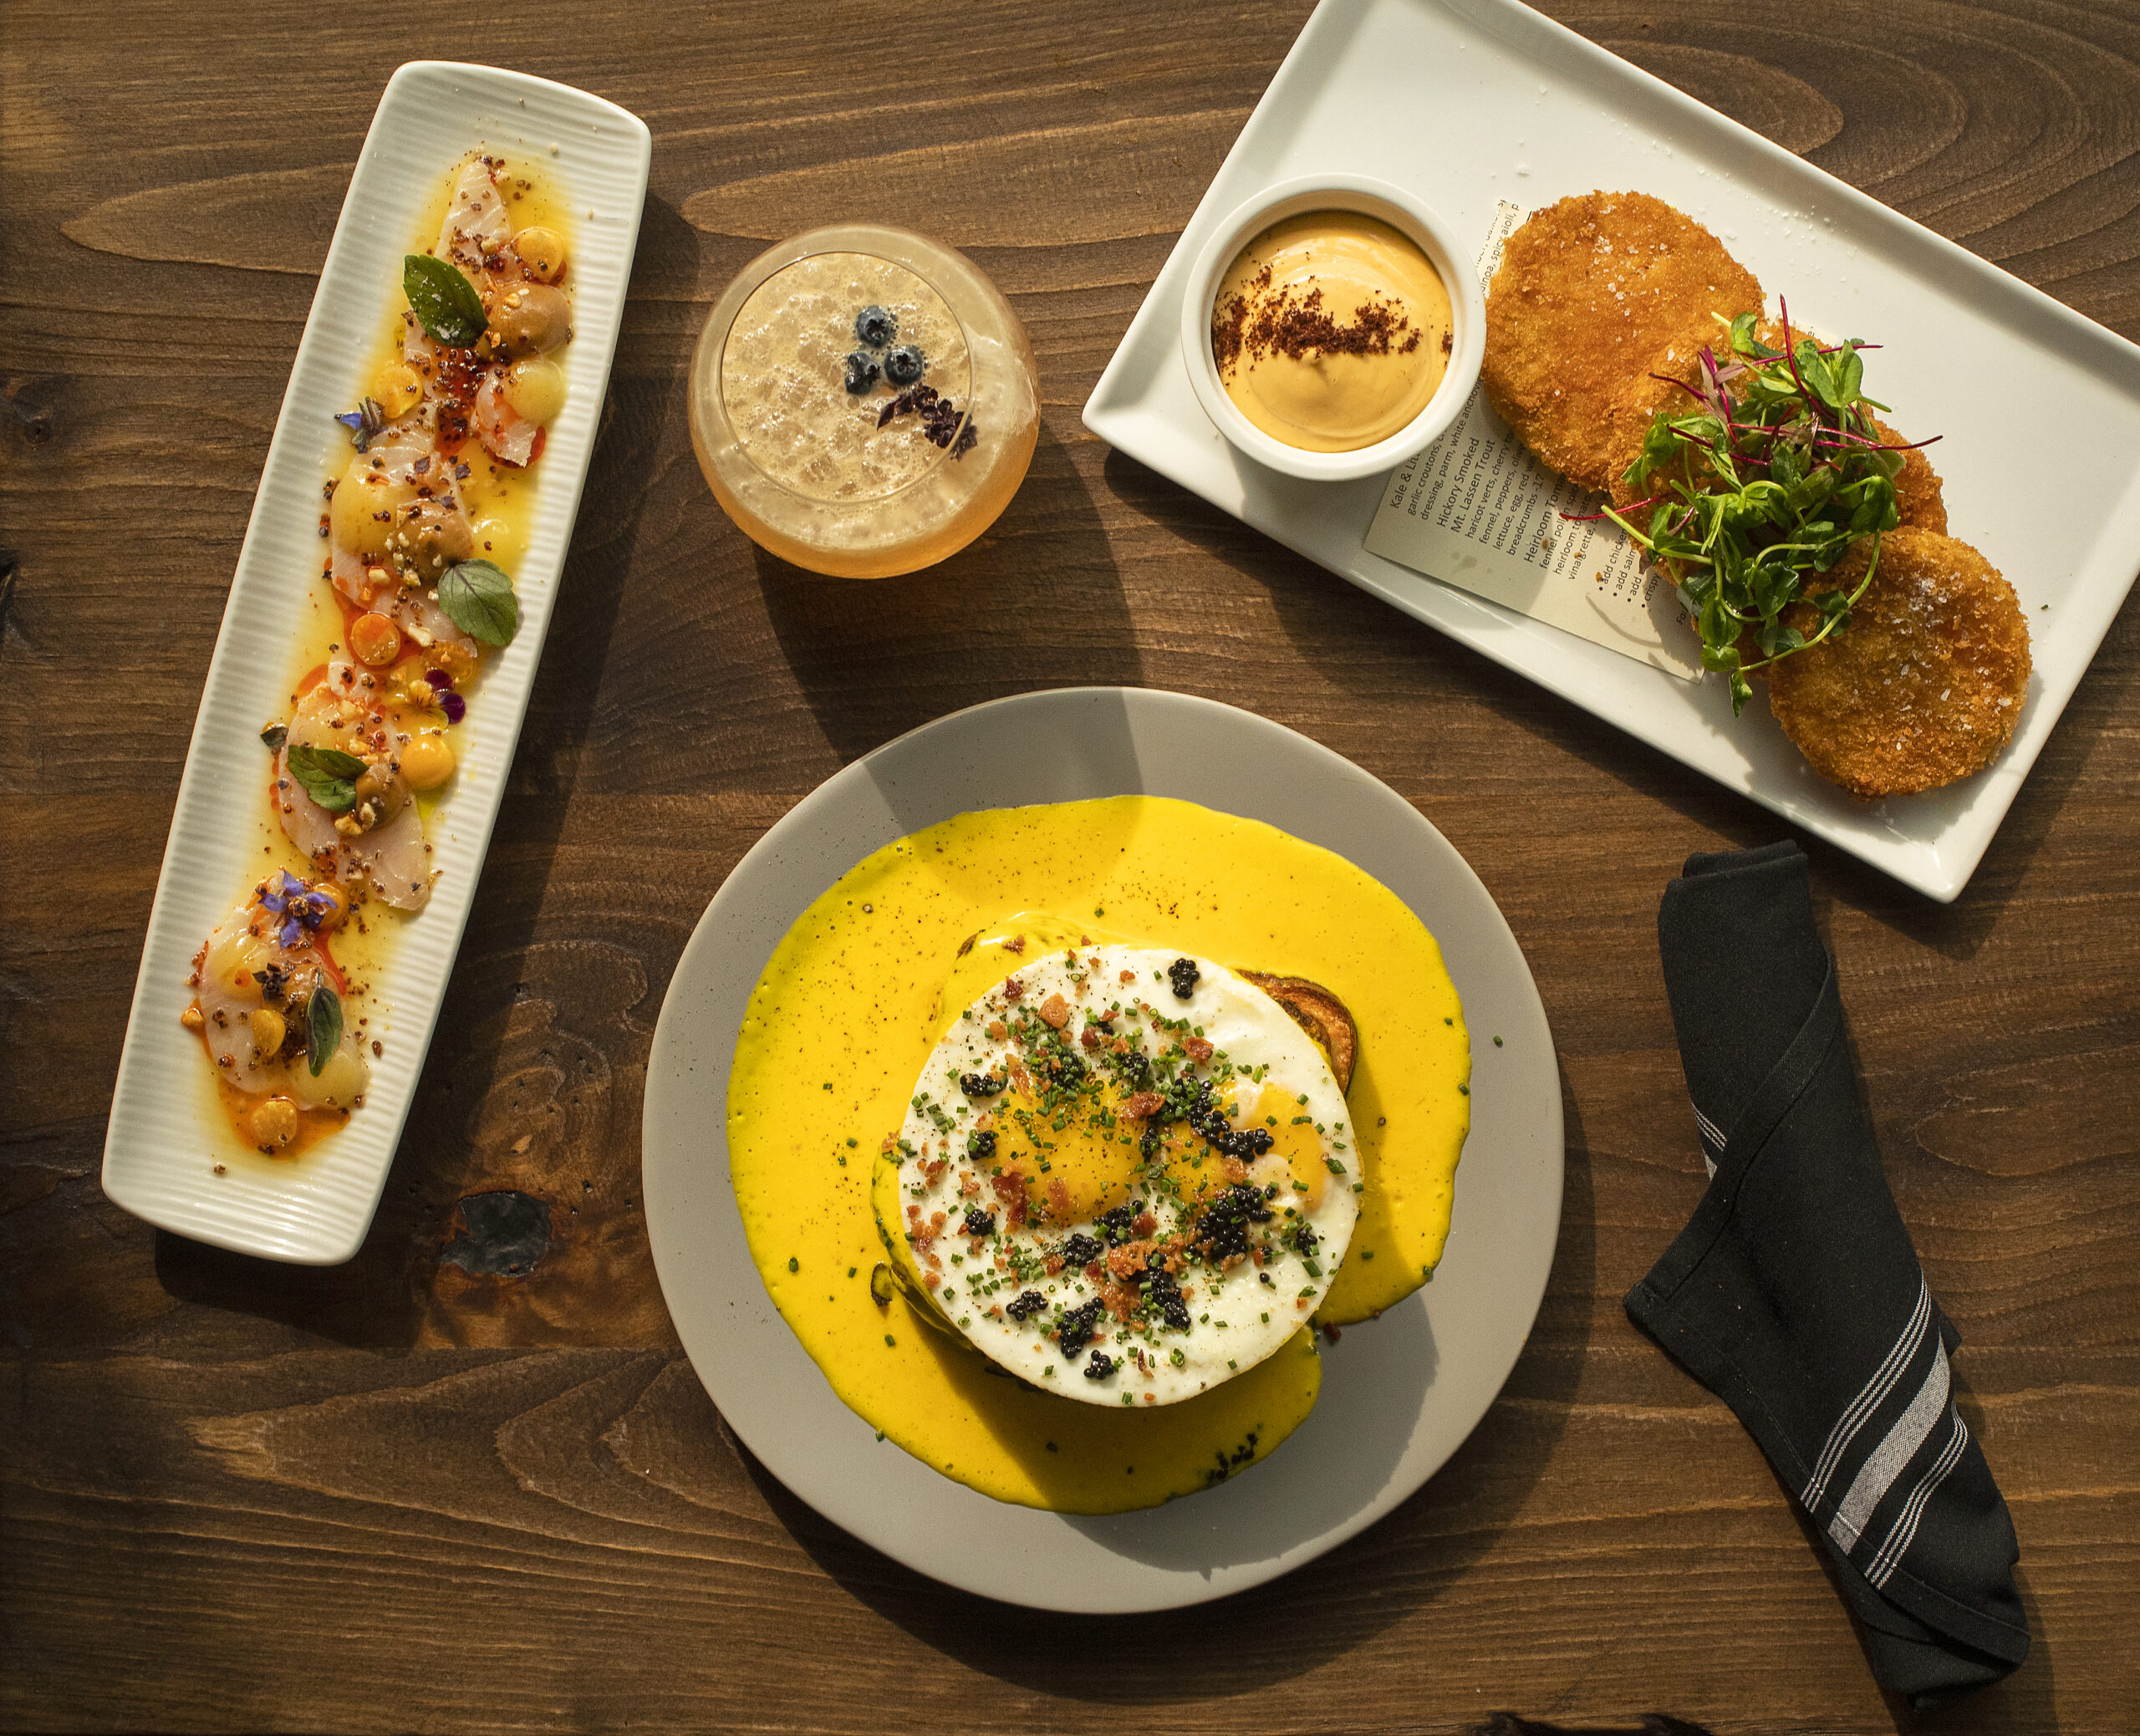 Clockwise from left, Hamachi Crudo, Lavender Liaison cocktail, Fried Green Tomatoes and Lobster Croque Madame from the Blue Ridge Kitchen in Sebastopol's Barlow district. (John Burgess/The Press Democrat)